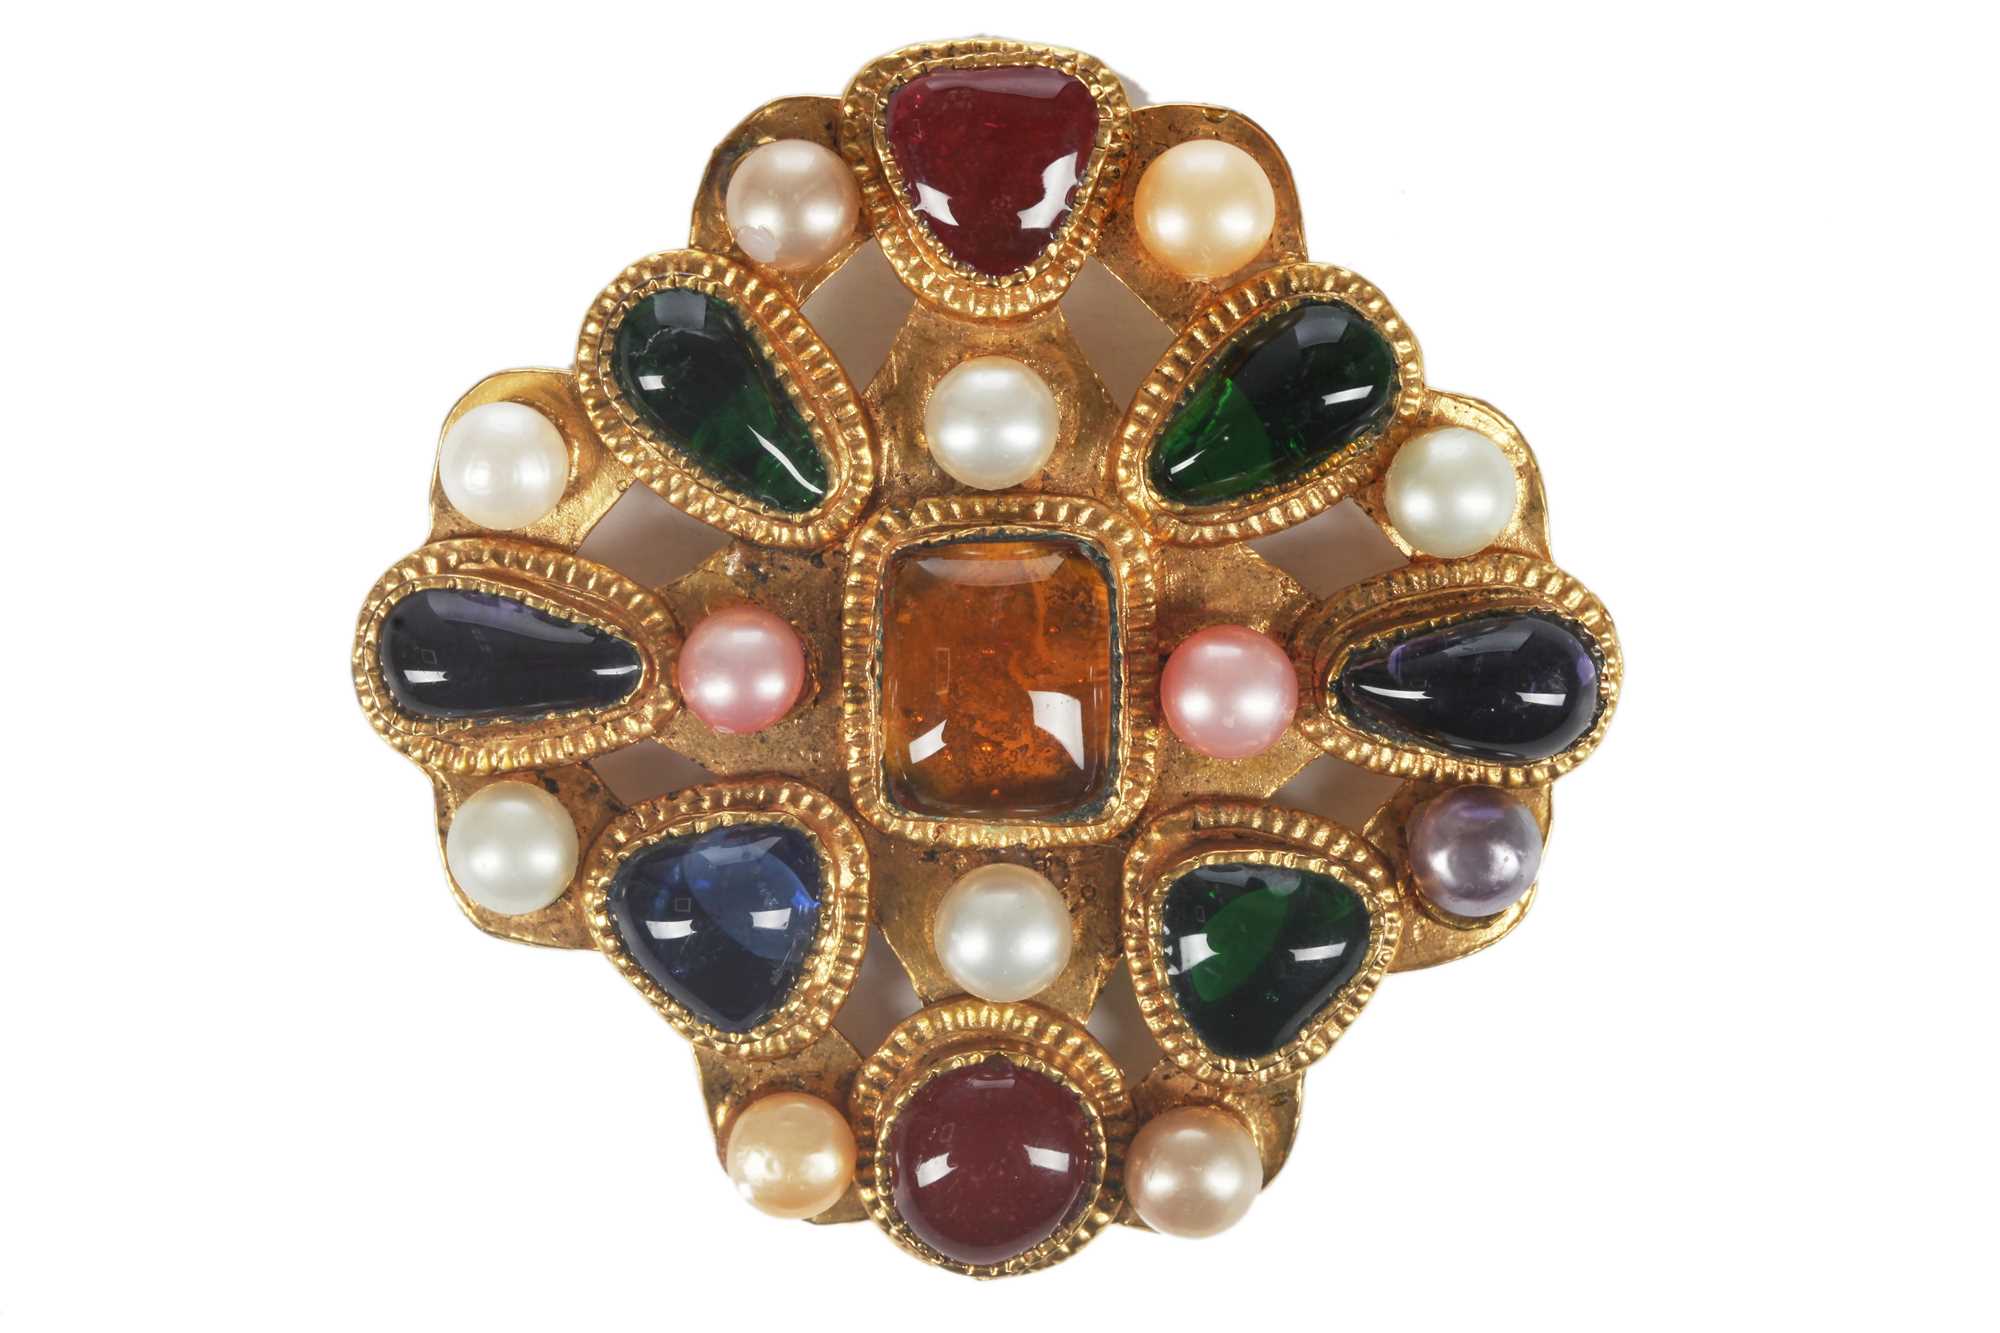 Lot 37 - A Gripoix for Chanel pâte de verre and pearl brooch, late 1980s-early 1990s